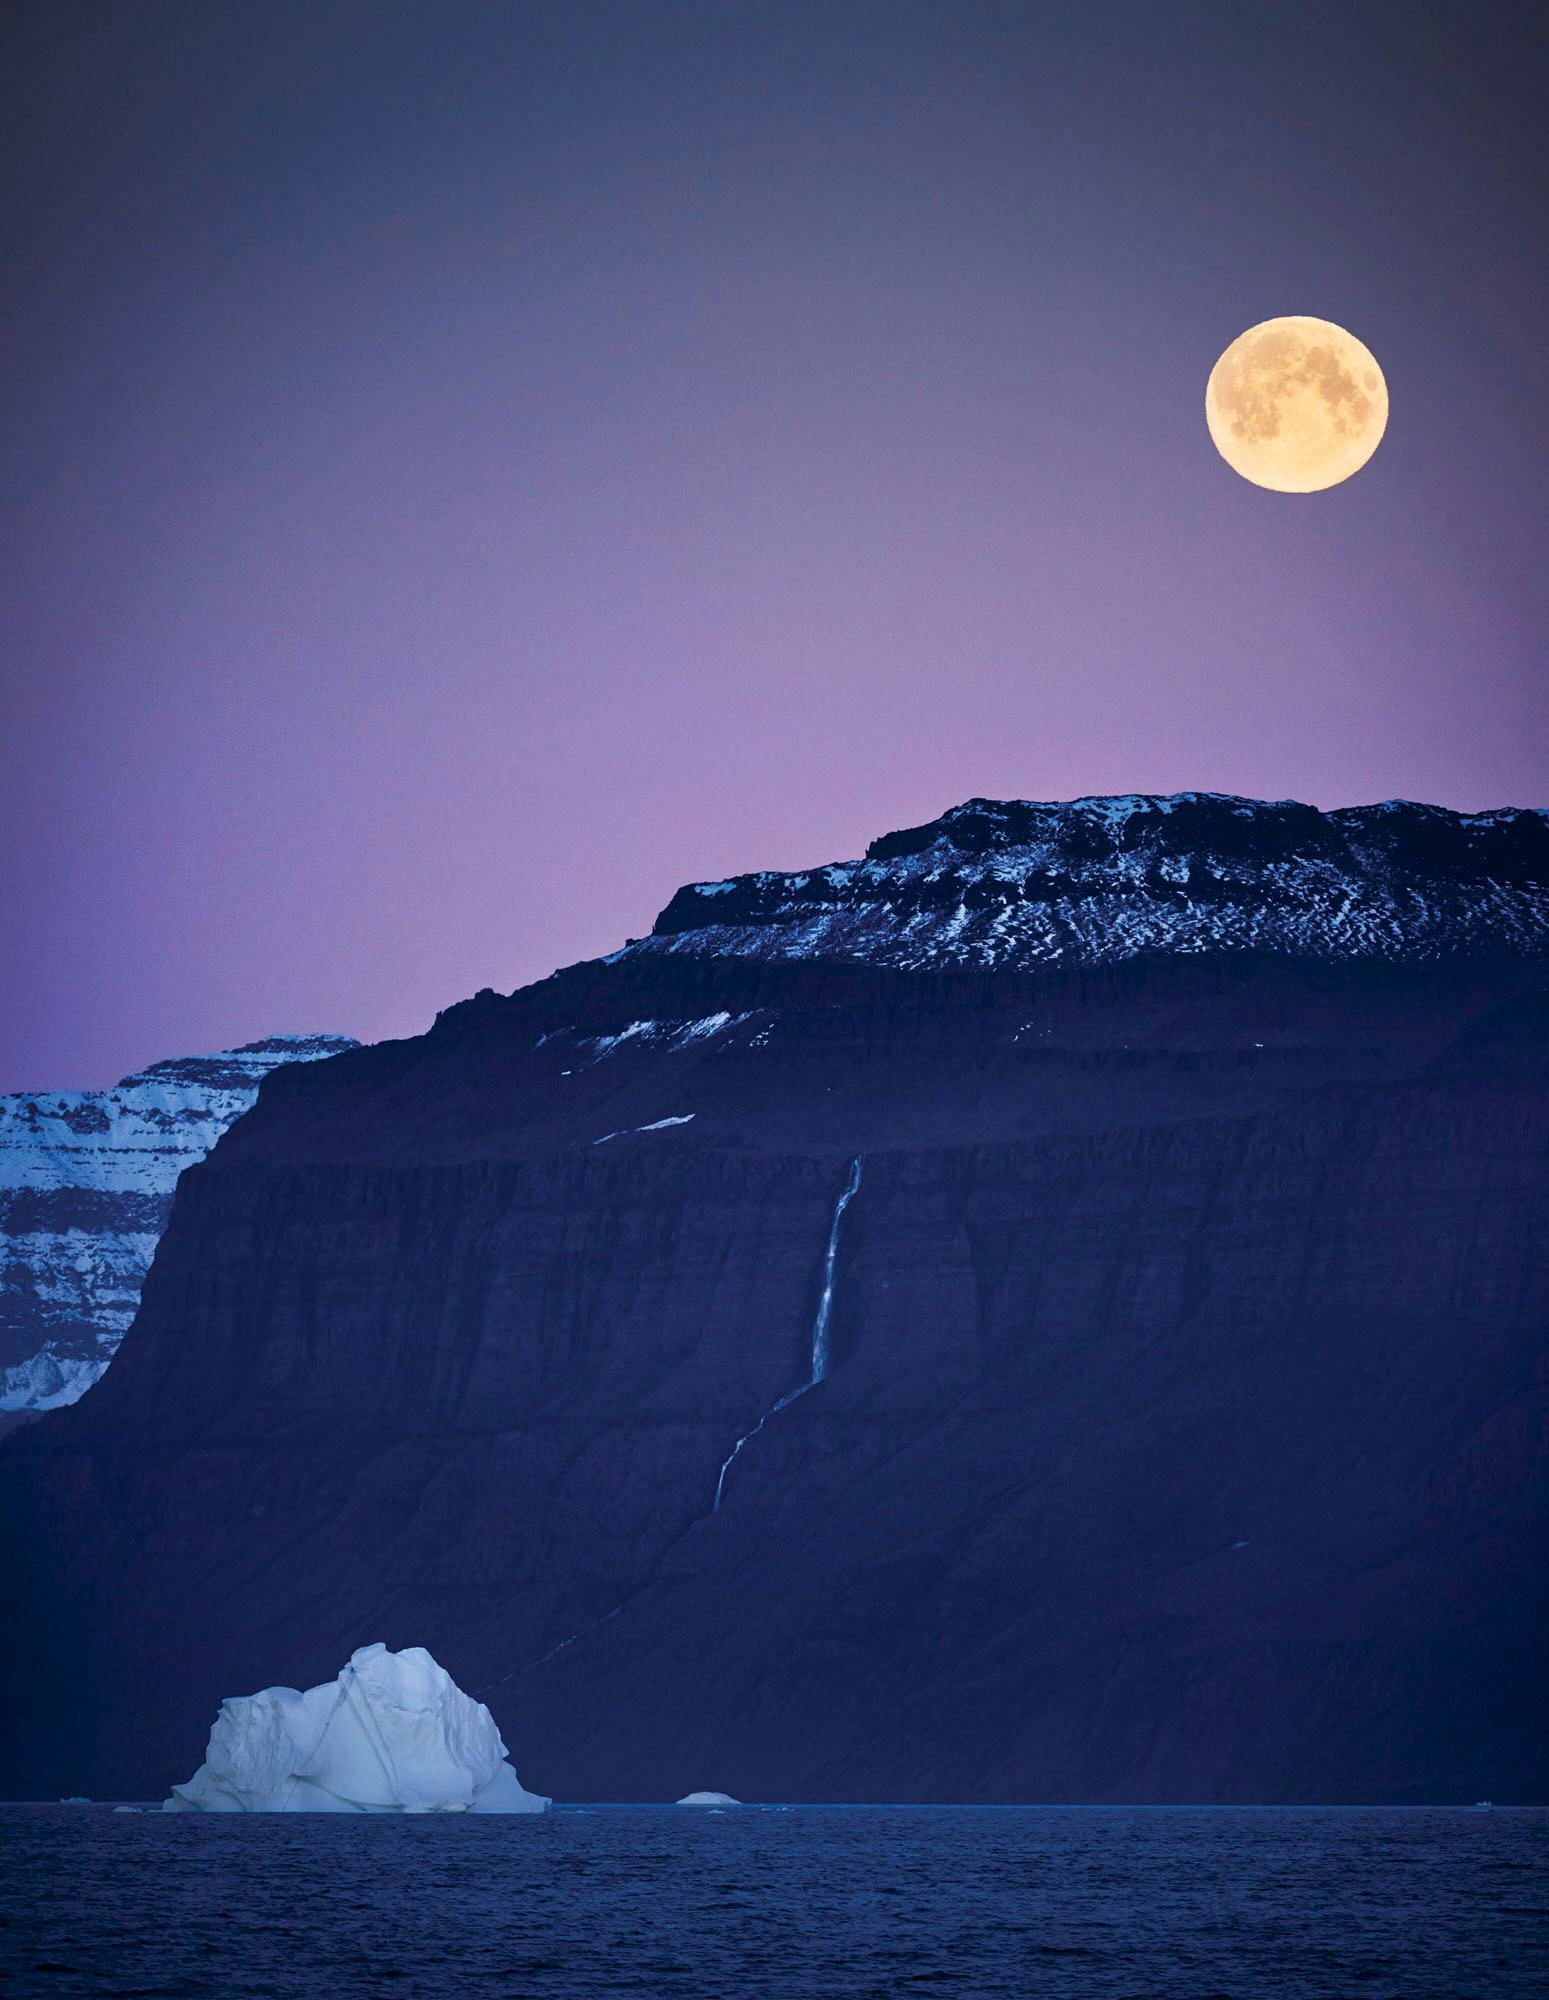 Here the moon and iceberg balance each other because both are lighter in tone than their surroundings, and because they are in opposite corners.